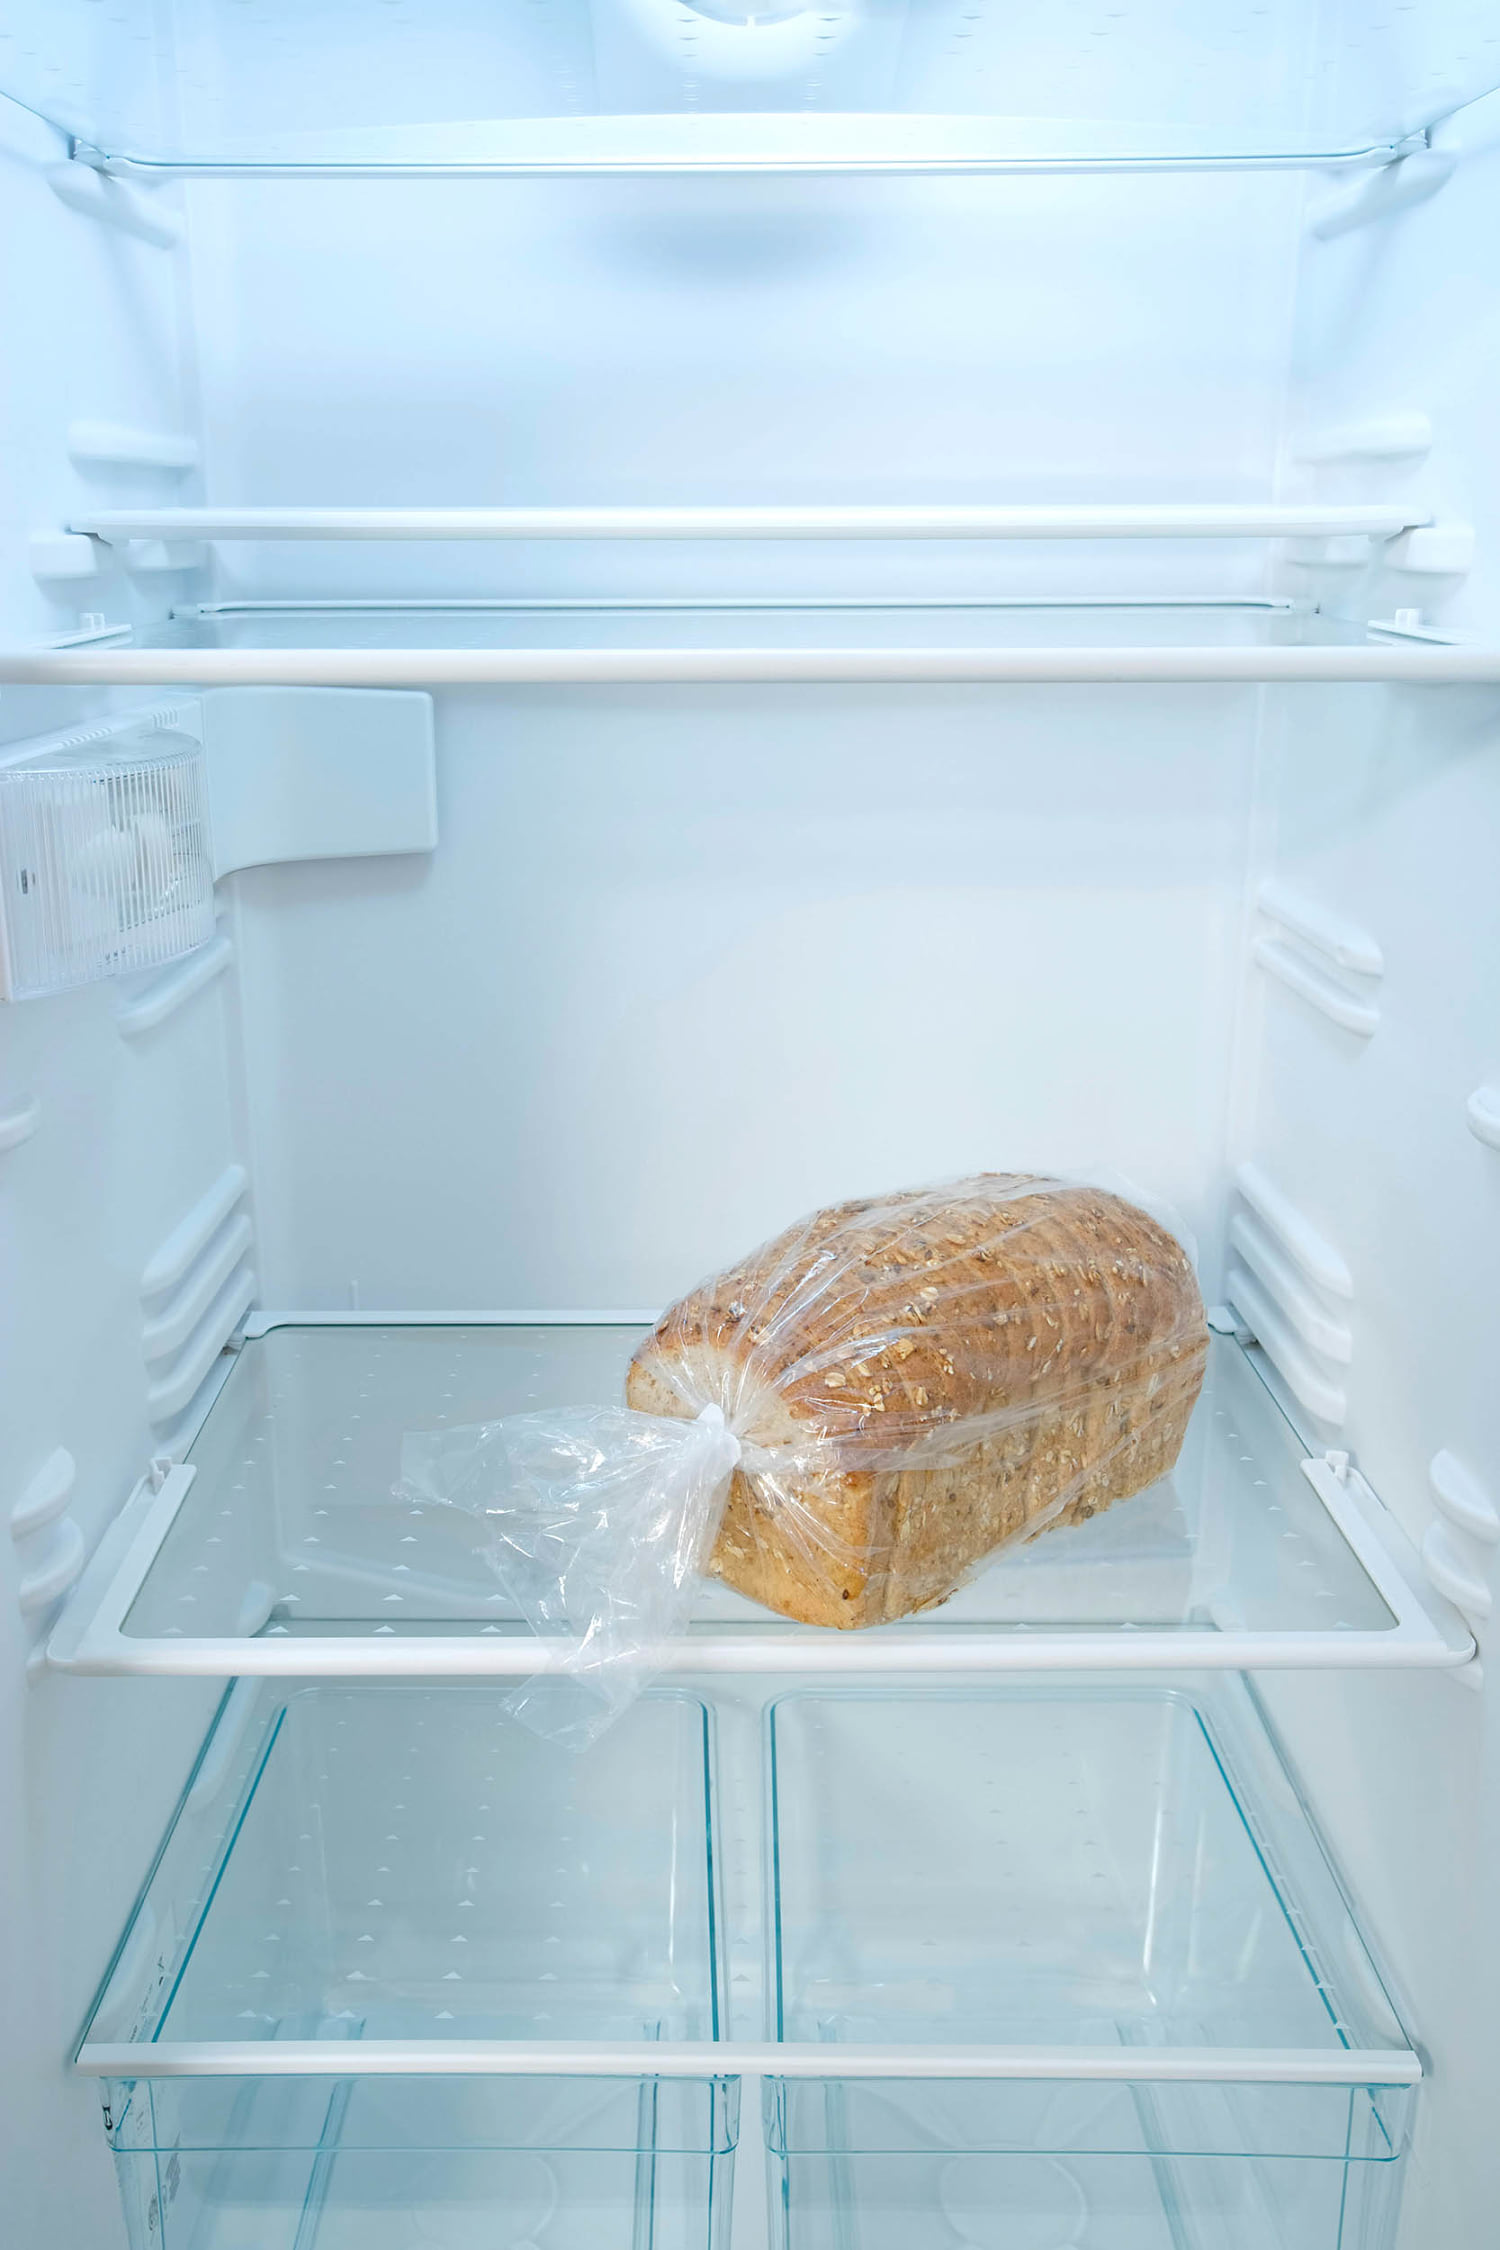 Should you be storing your bread in the refrigerator? Experts weigh in